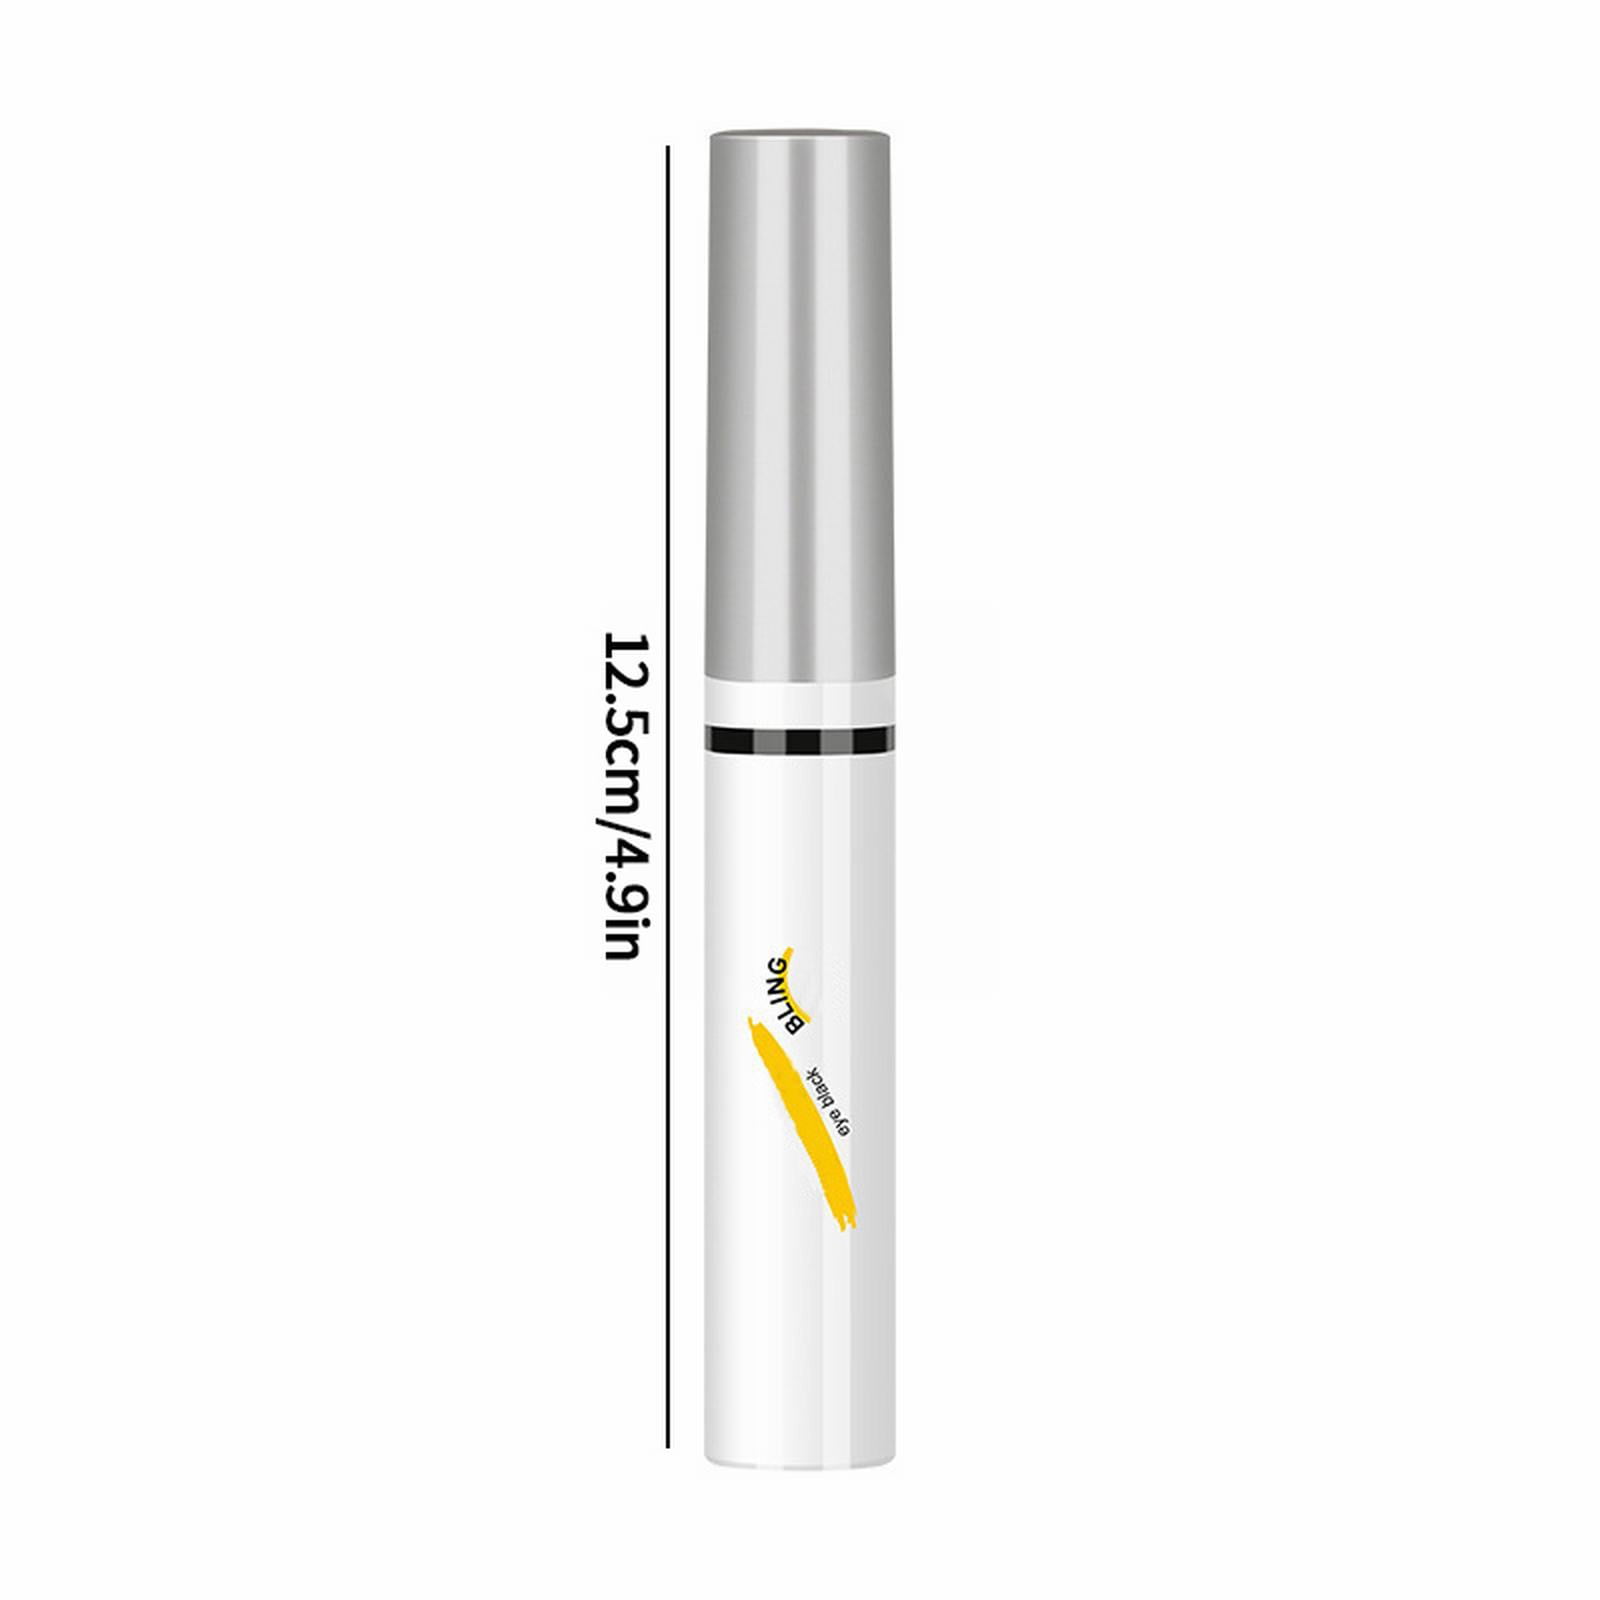  Non Smudgy Eye Black Lengthens Dazzles Plays With Colors Slim  Curly Color Makeup Mini Mascara Tube Empty (B, One Size) : Beauty &  Personal Care